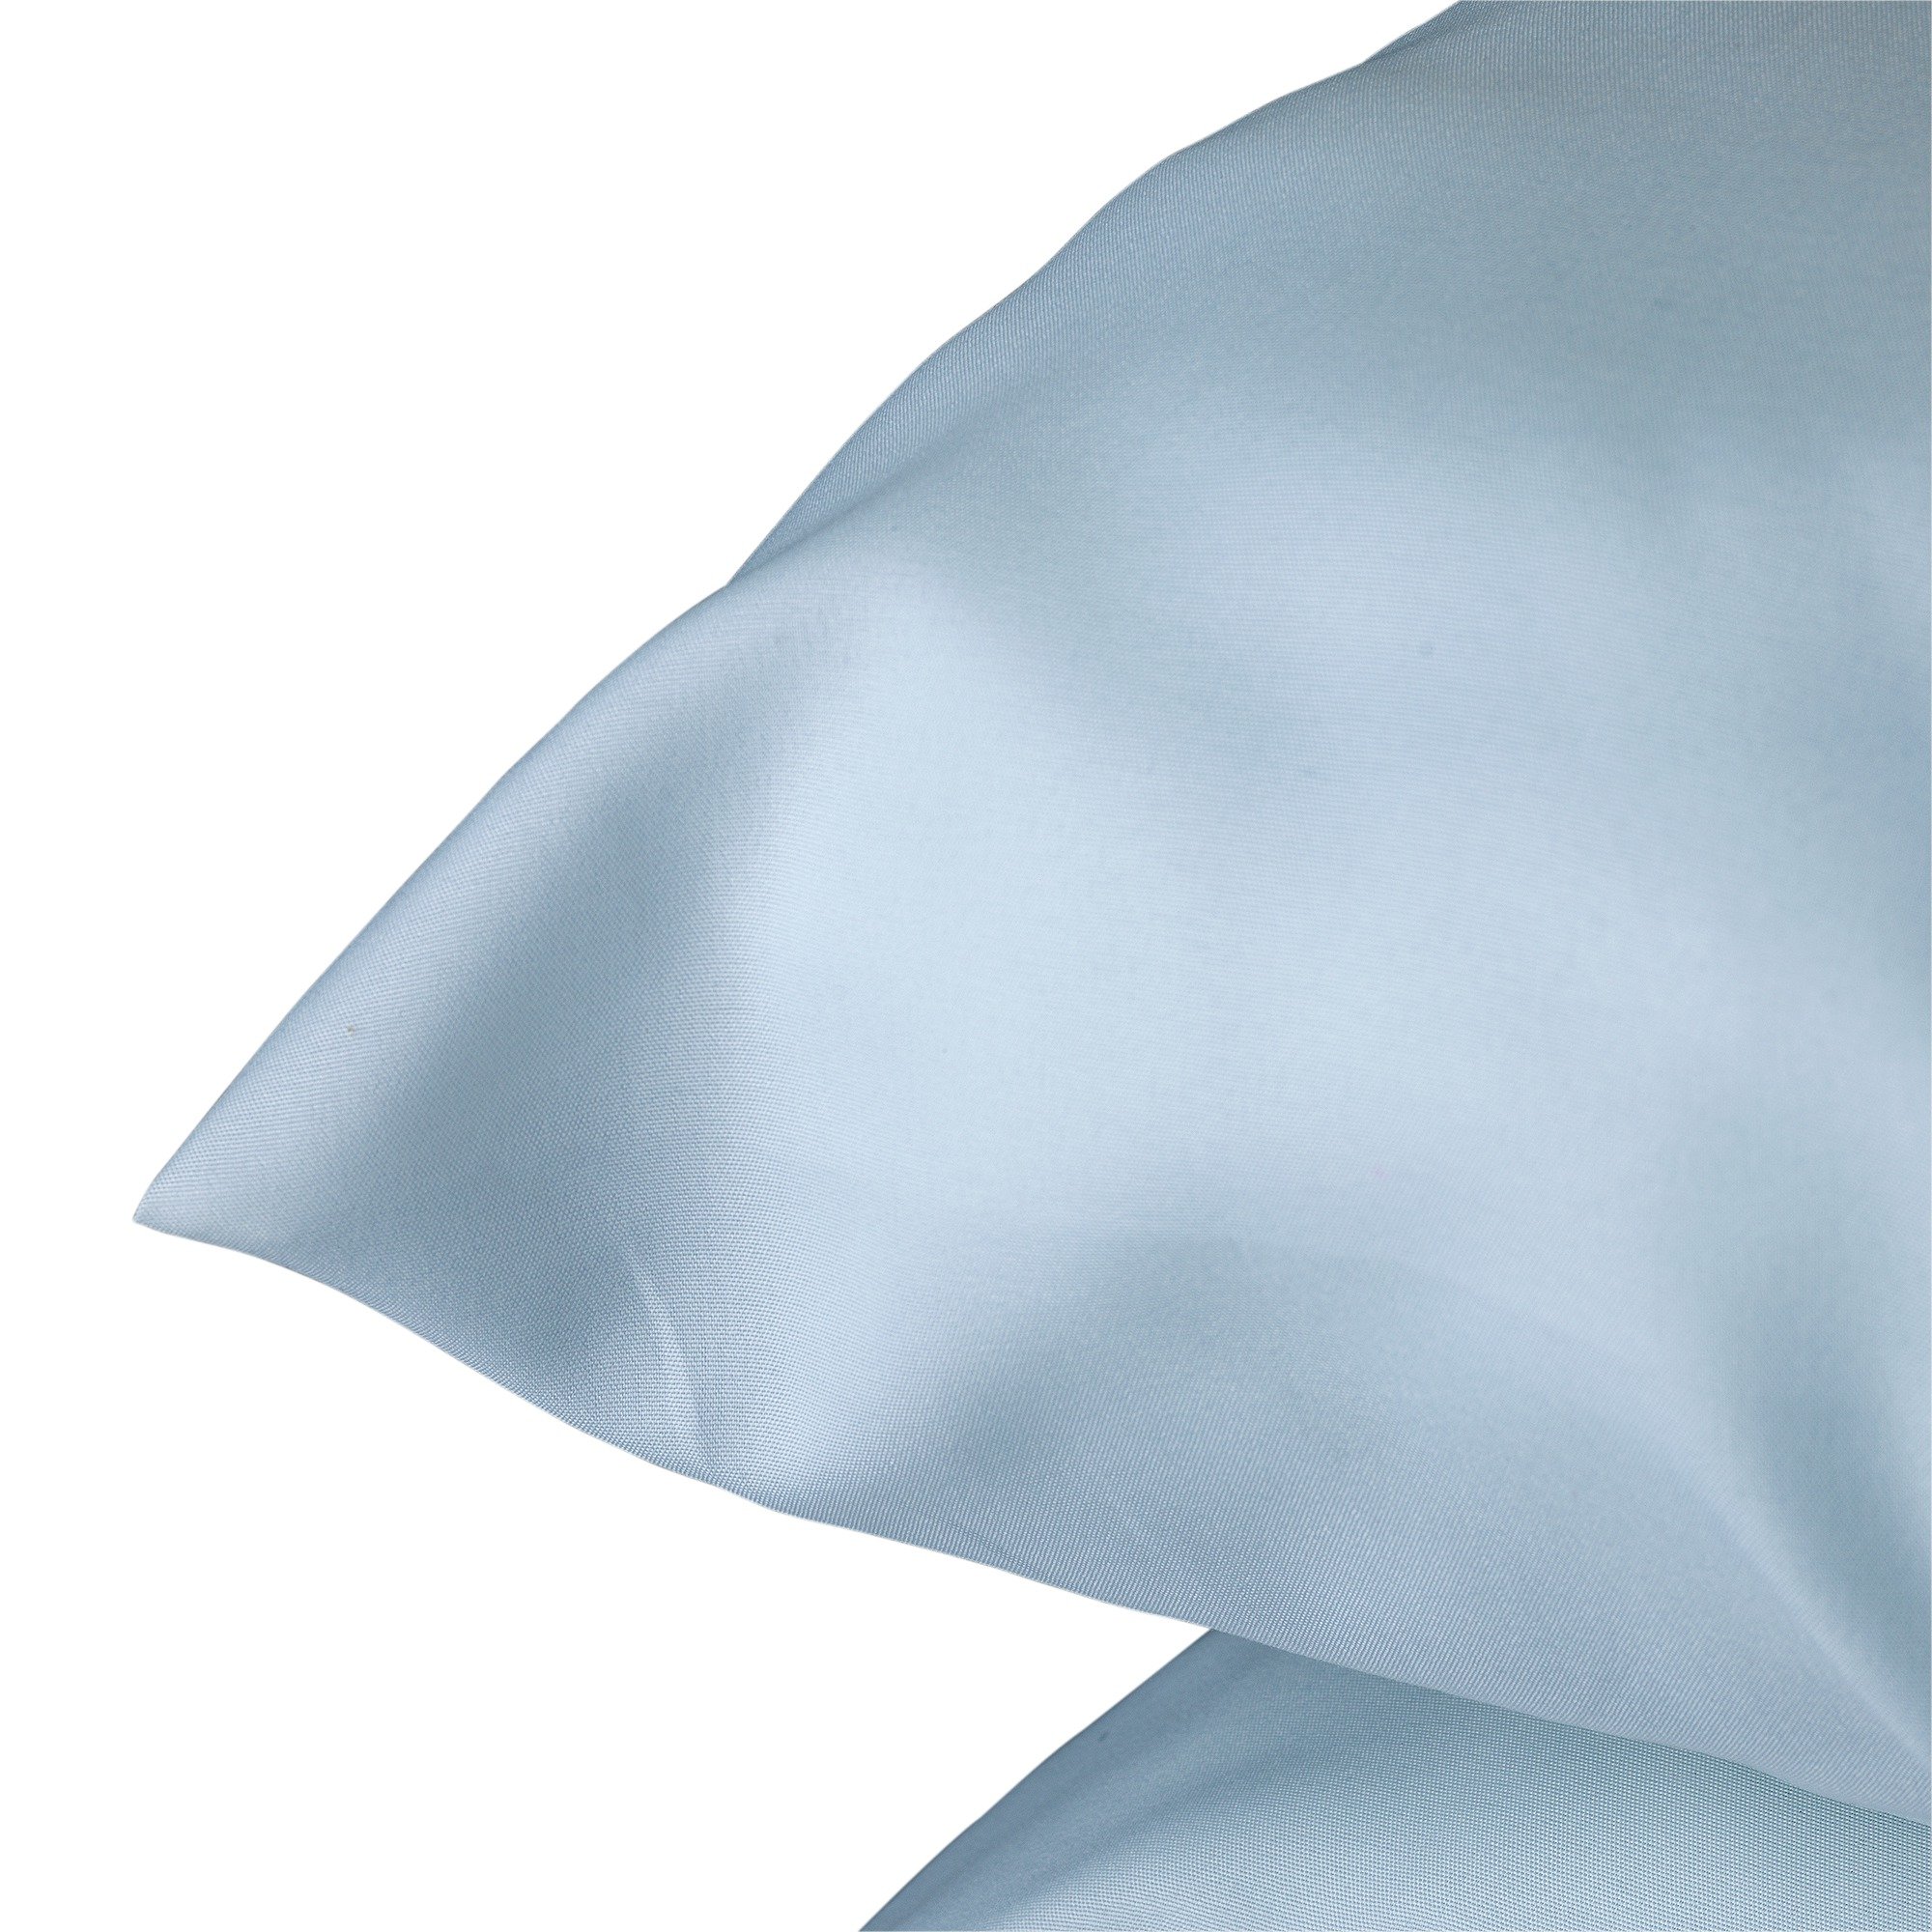 Argos Home Everyday Soft Touch Medium Support Pillows - Pair